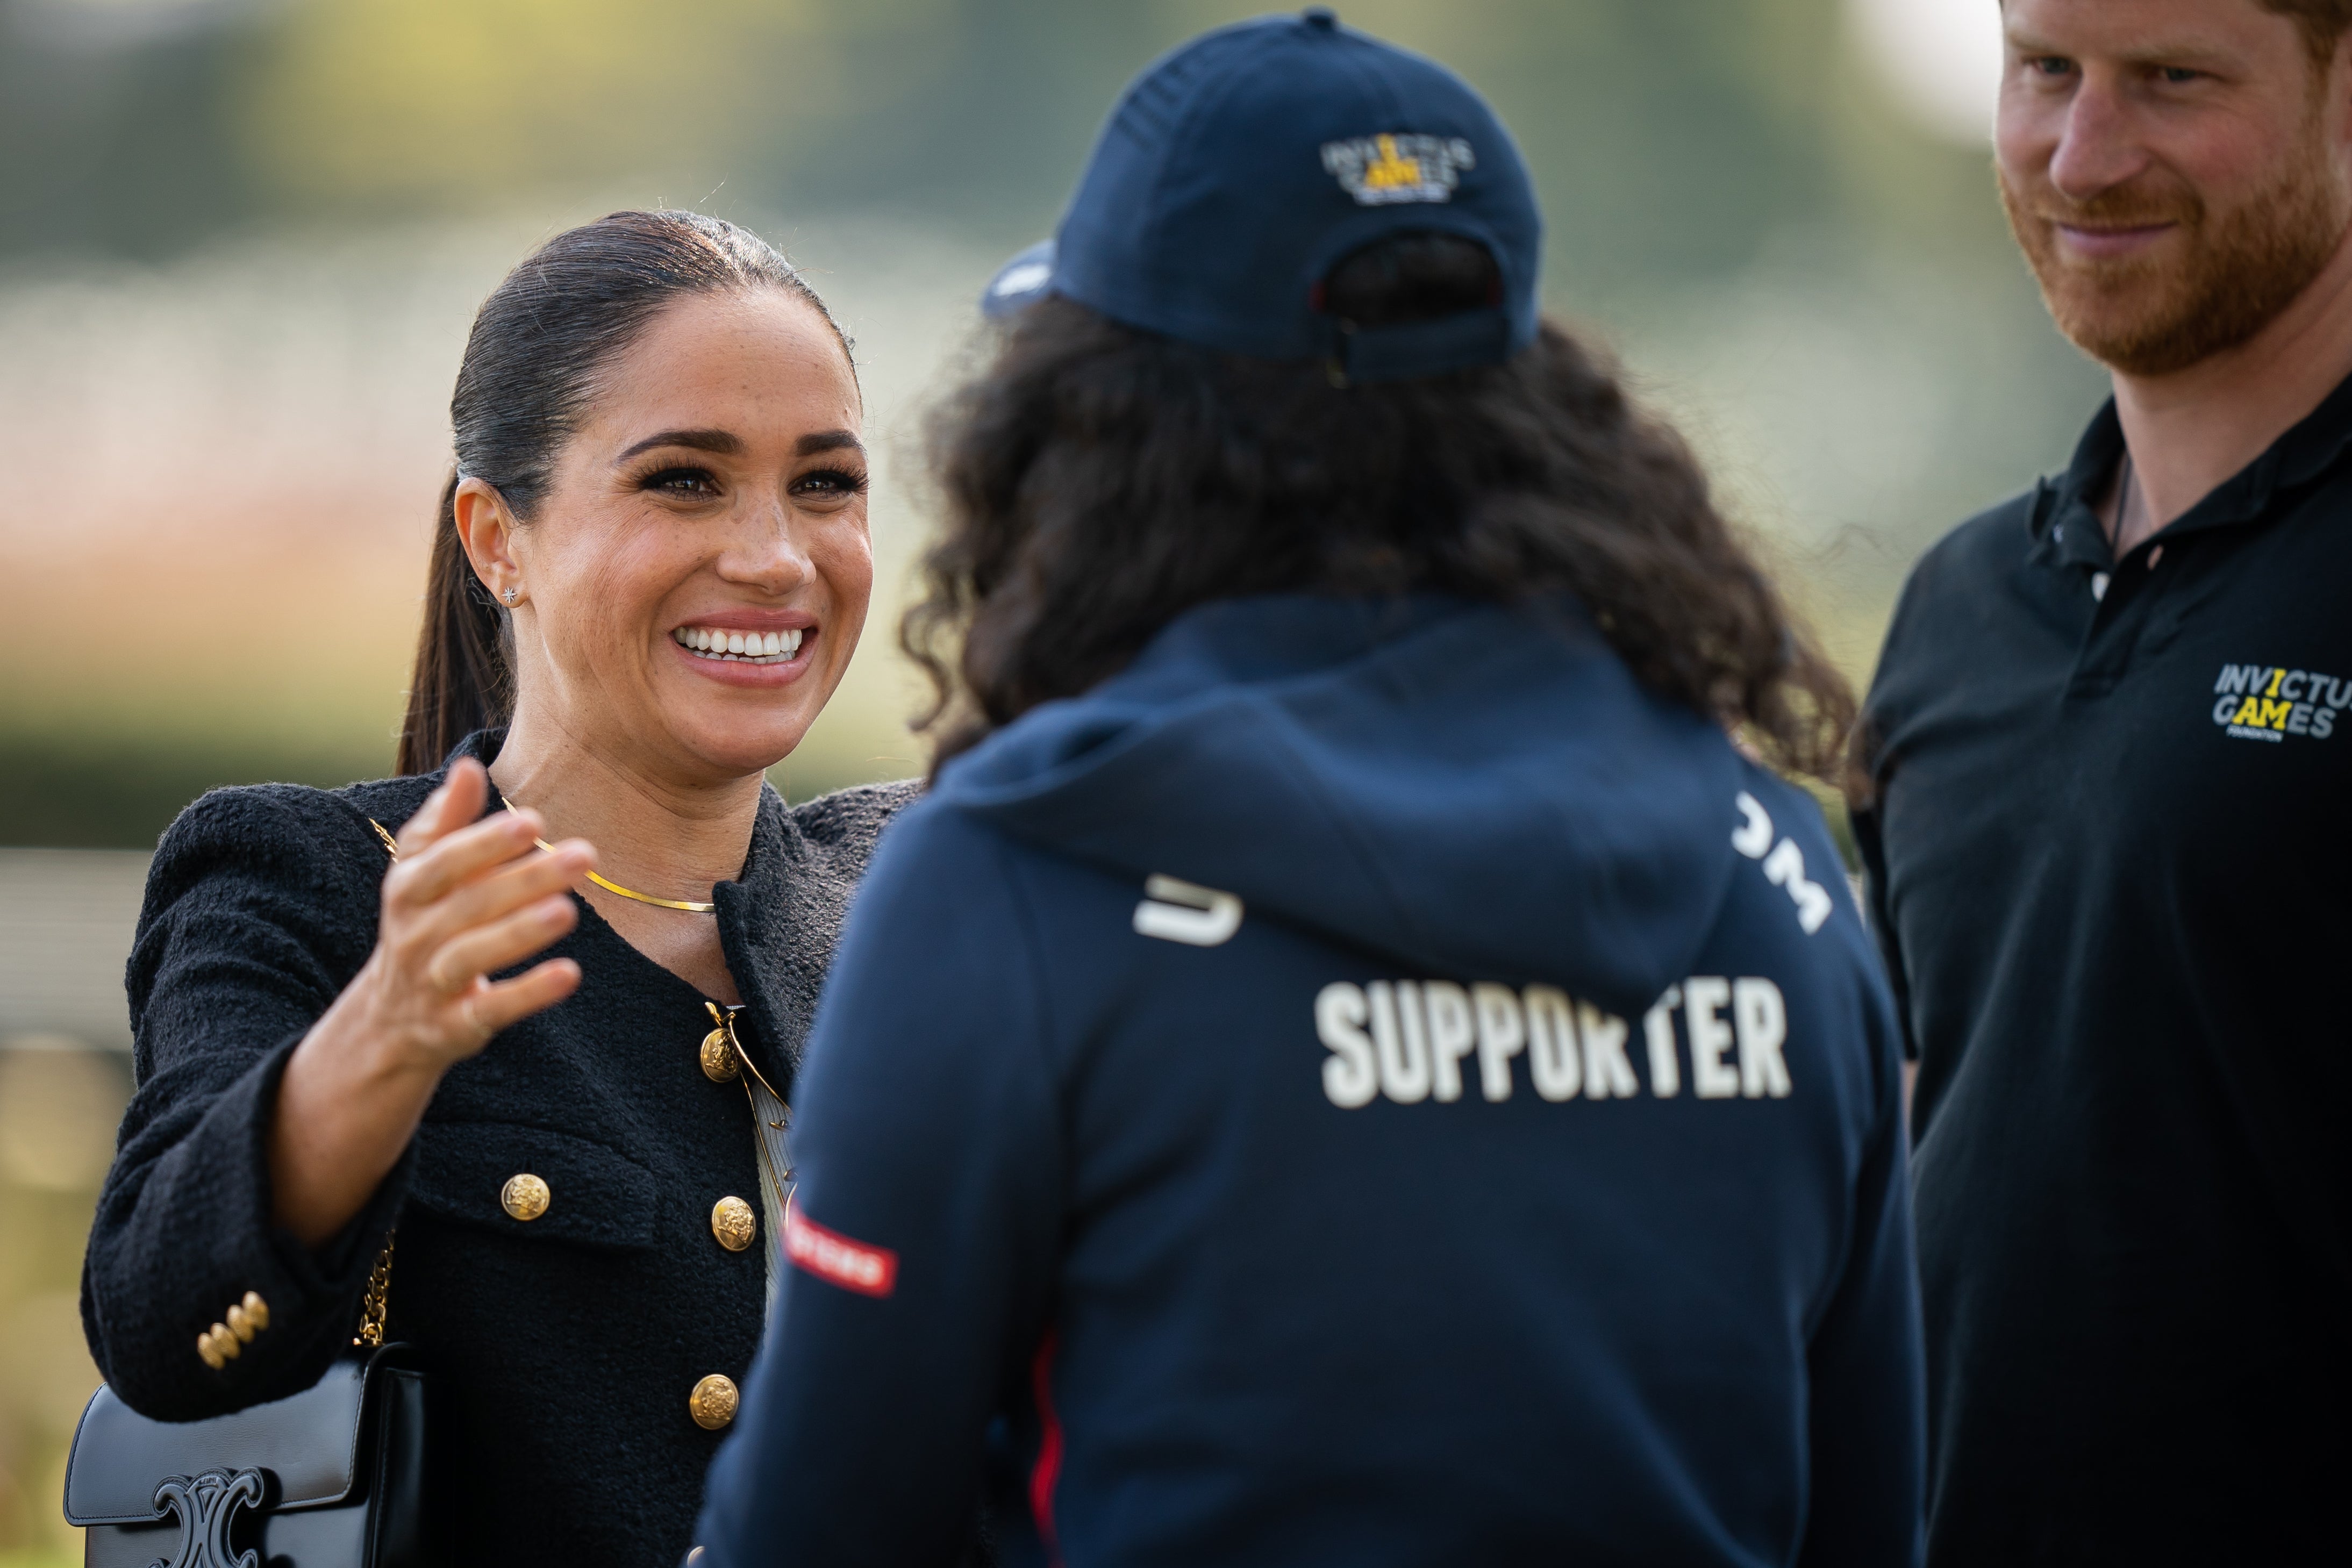 Meghan hugs a UK supporter during the Invictus Games at Zuiderpark (Aaron Chown/PA)